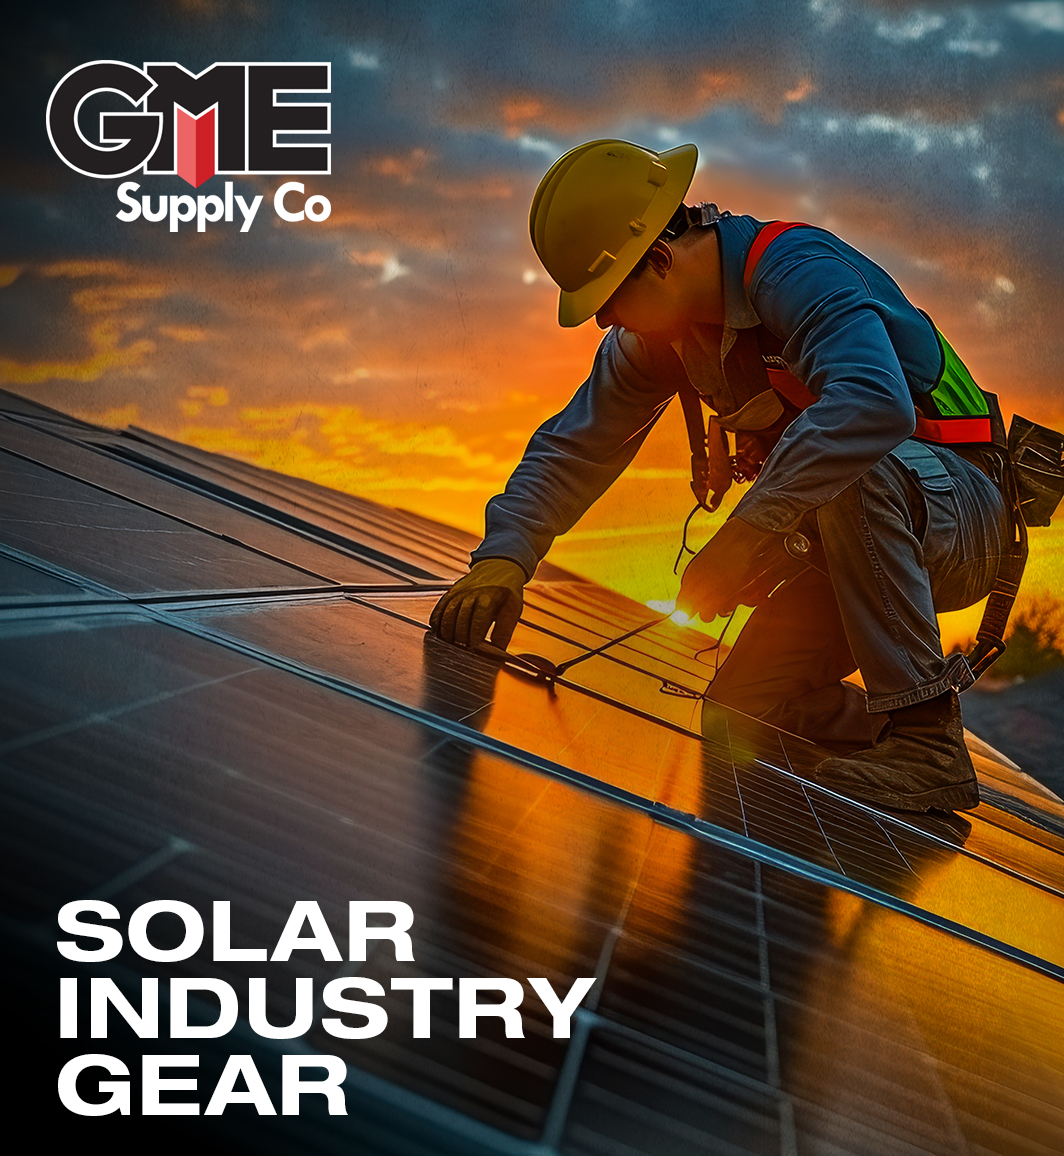 Solar industry gear and equipment at GME